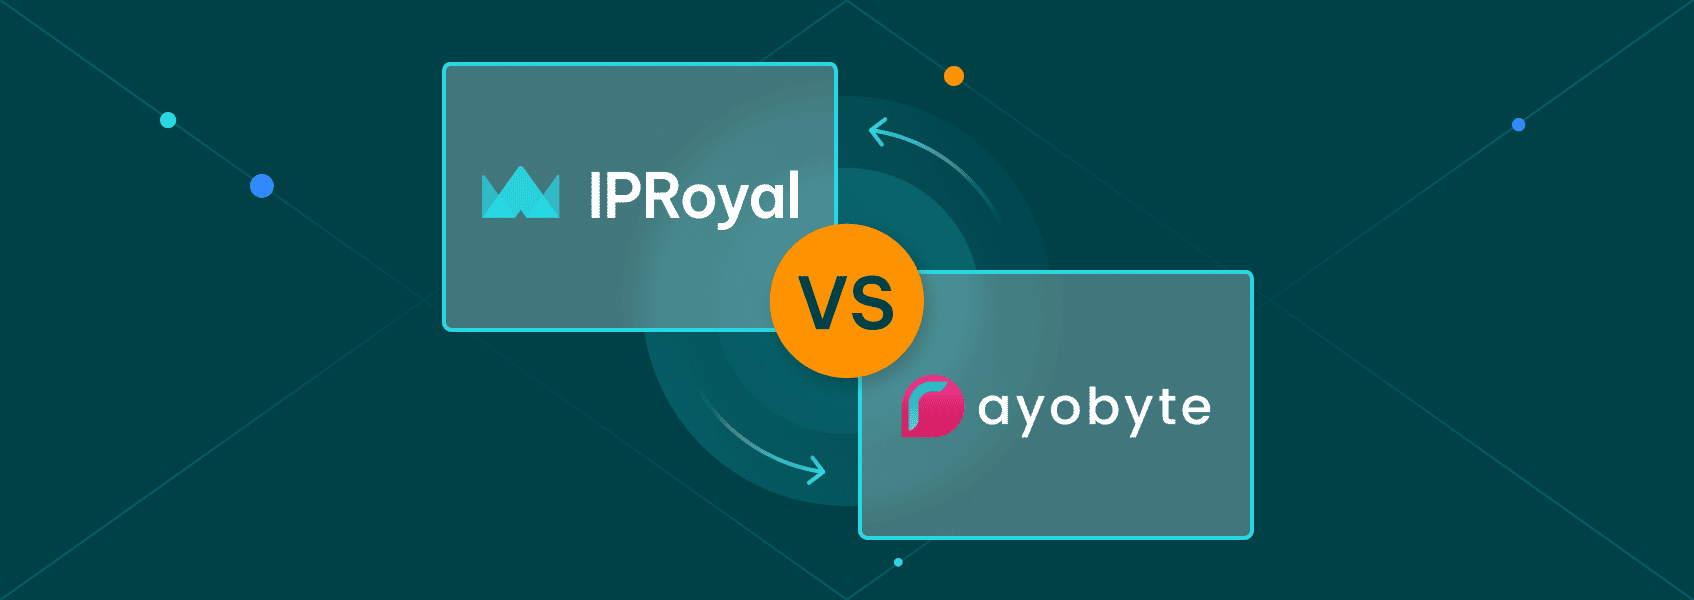 IPRoyal vs. Rayobyte - An In-depth Feature Comparison